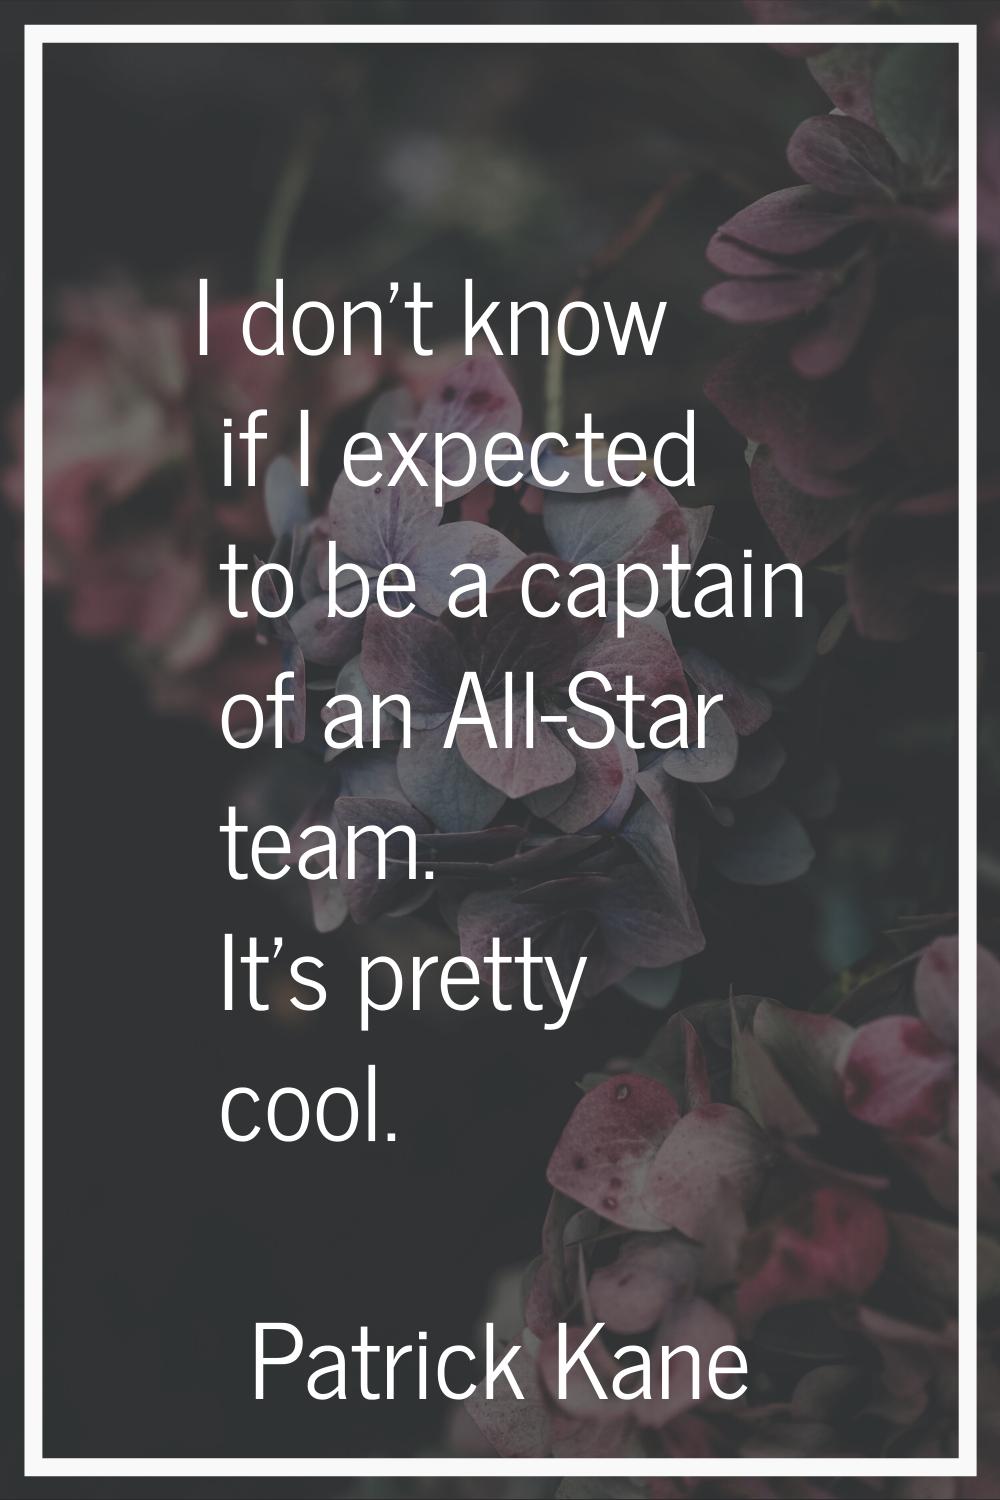 I don't know if I expected to be a captain of an All-Star team. It's pretty cool.